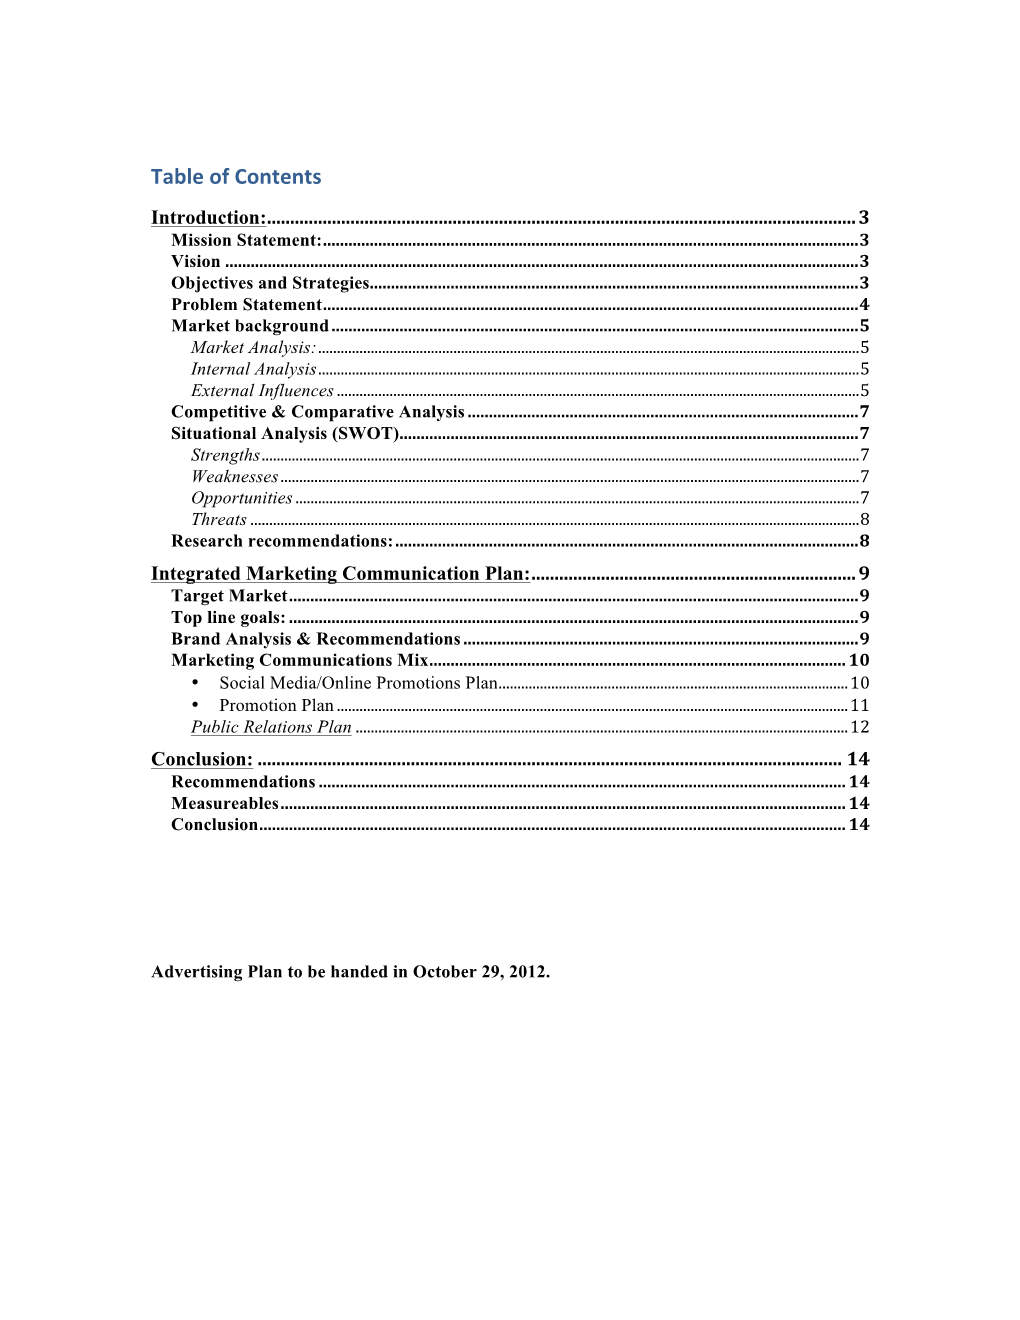 Table of Contents Introduction: